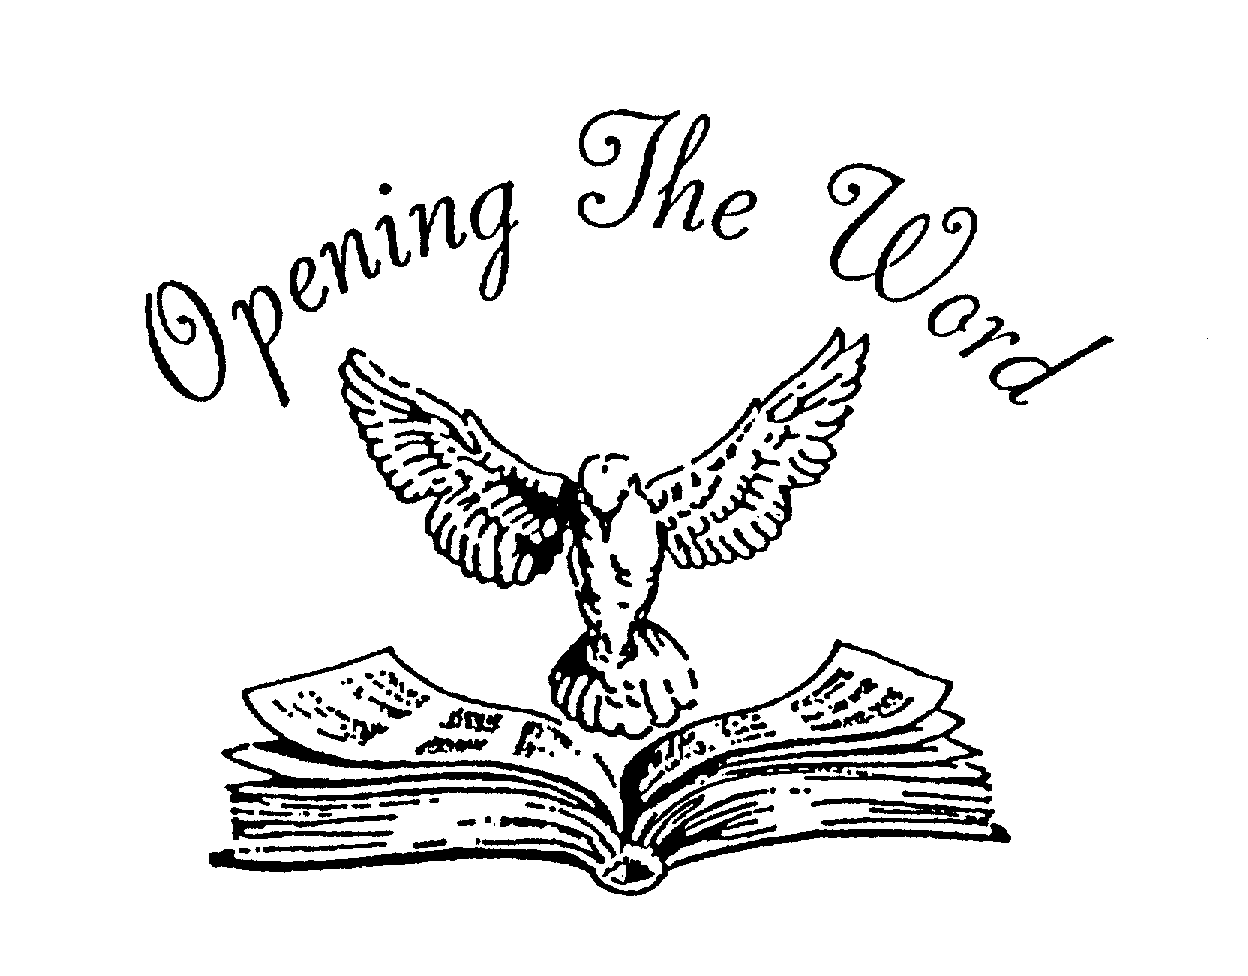 OPENING THE WORD